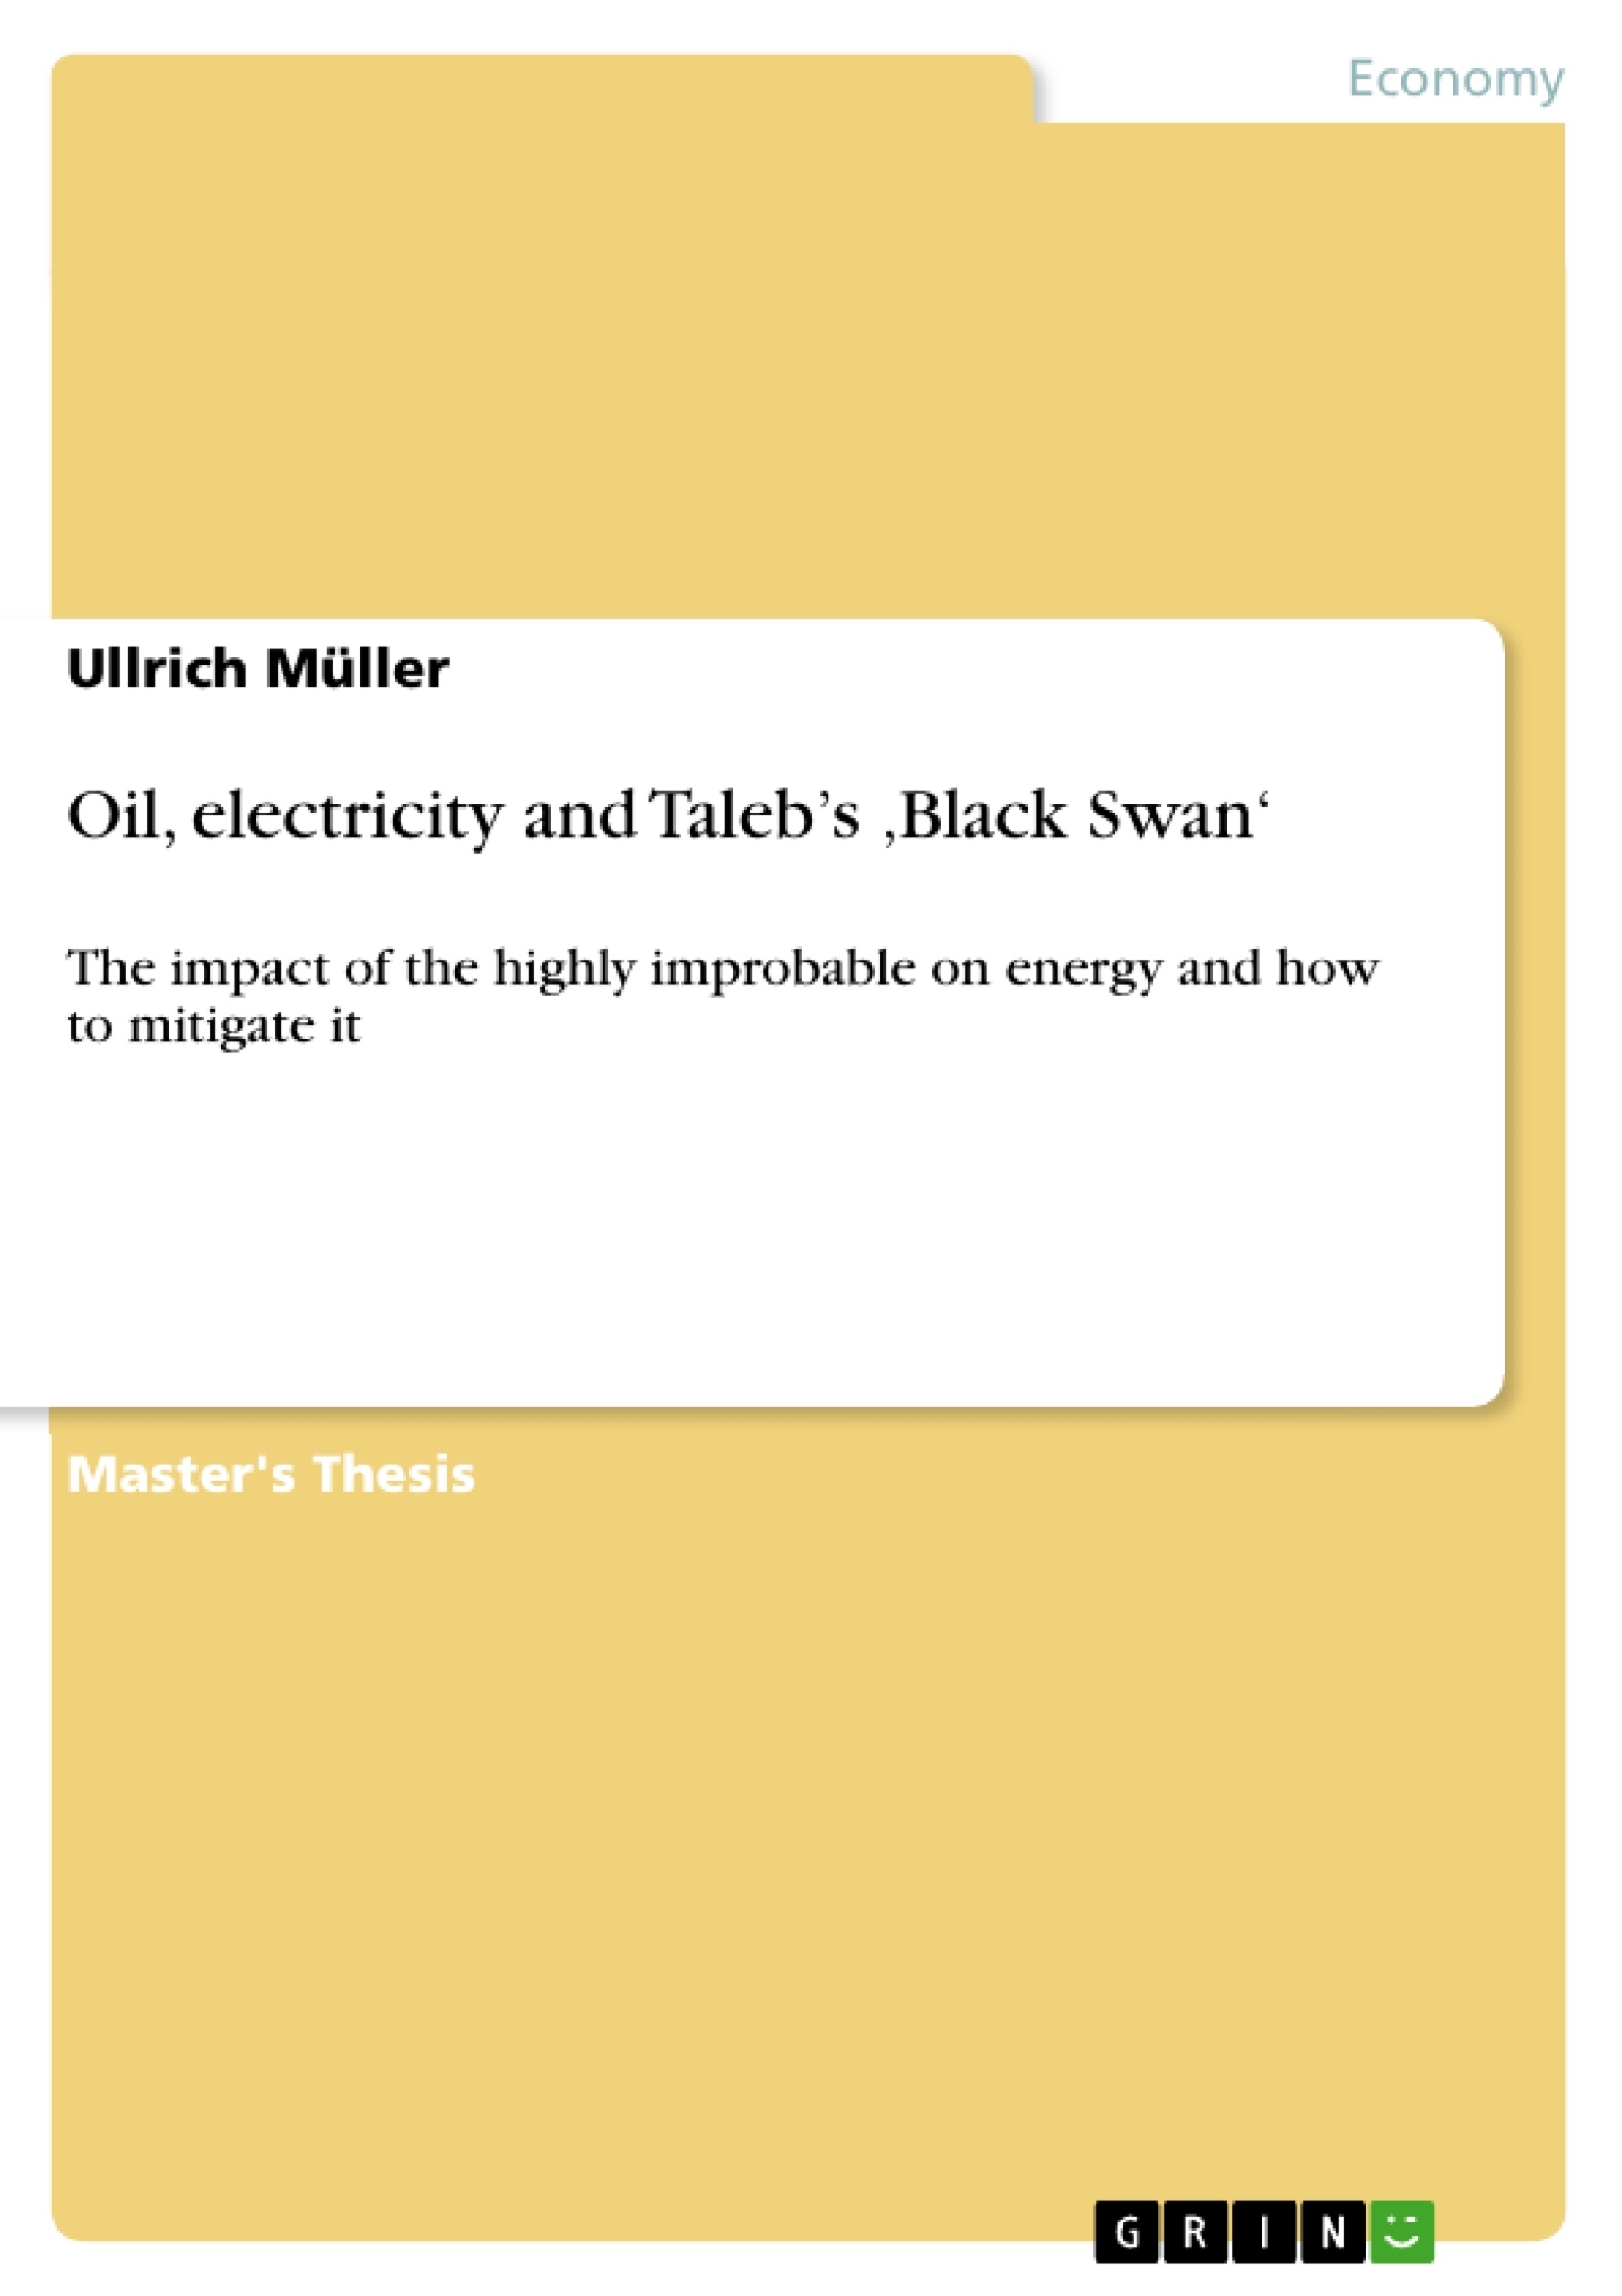 Title: Oil, electricity and Taleb’s ‚Black Swan‘